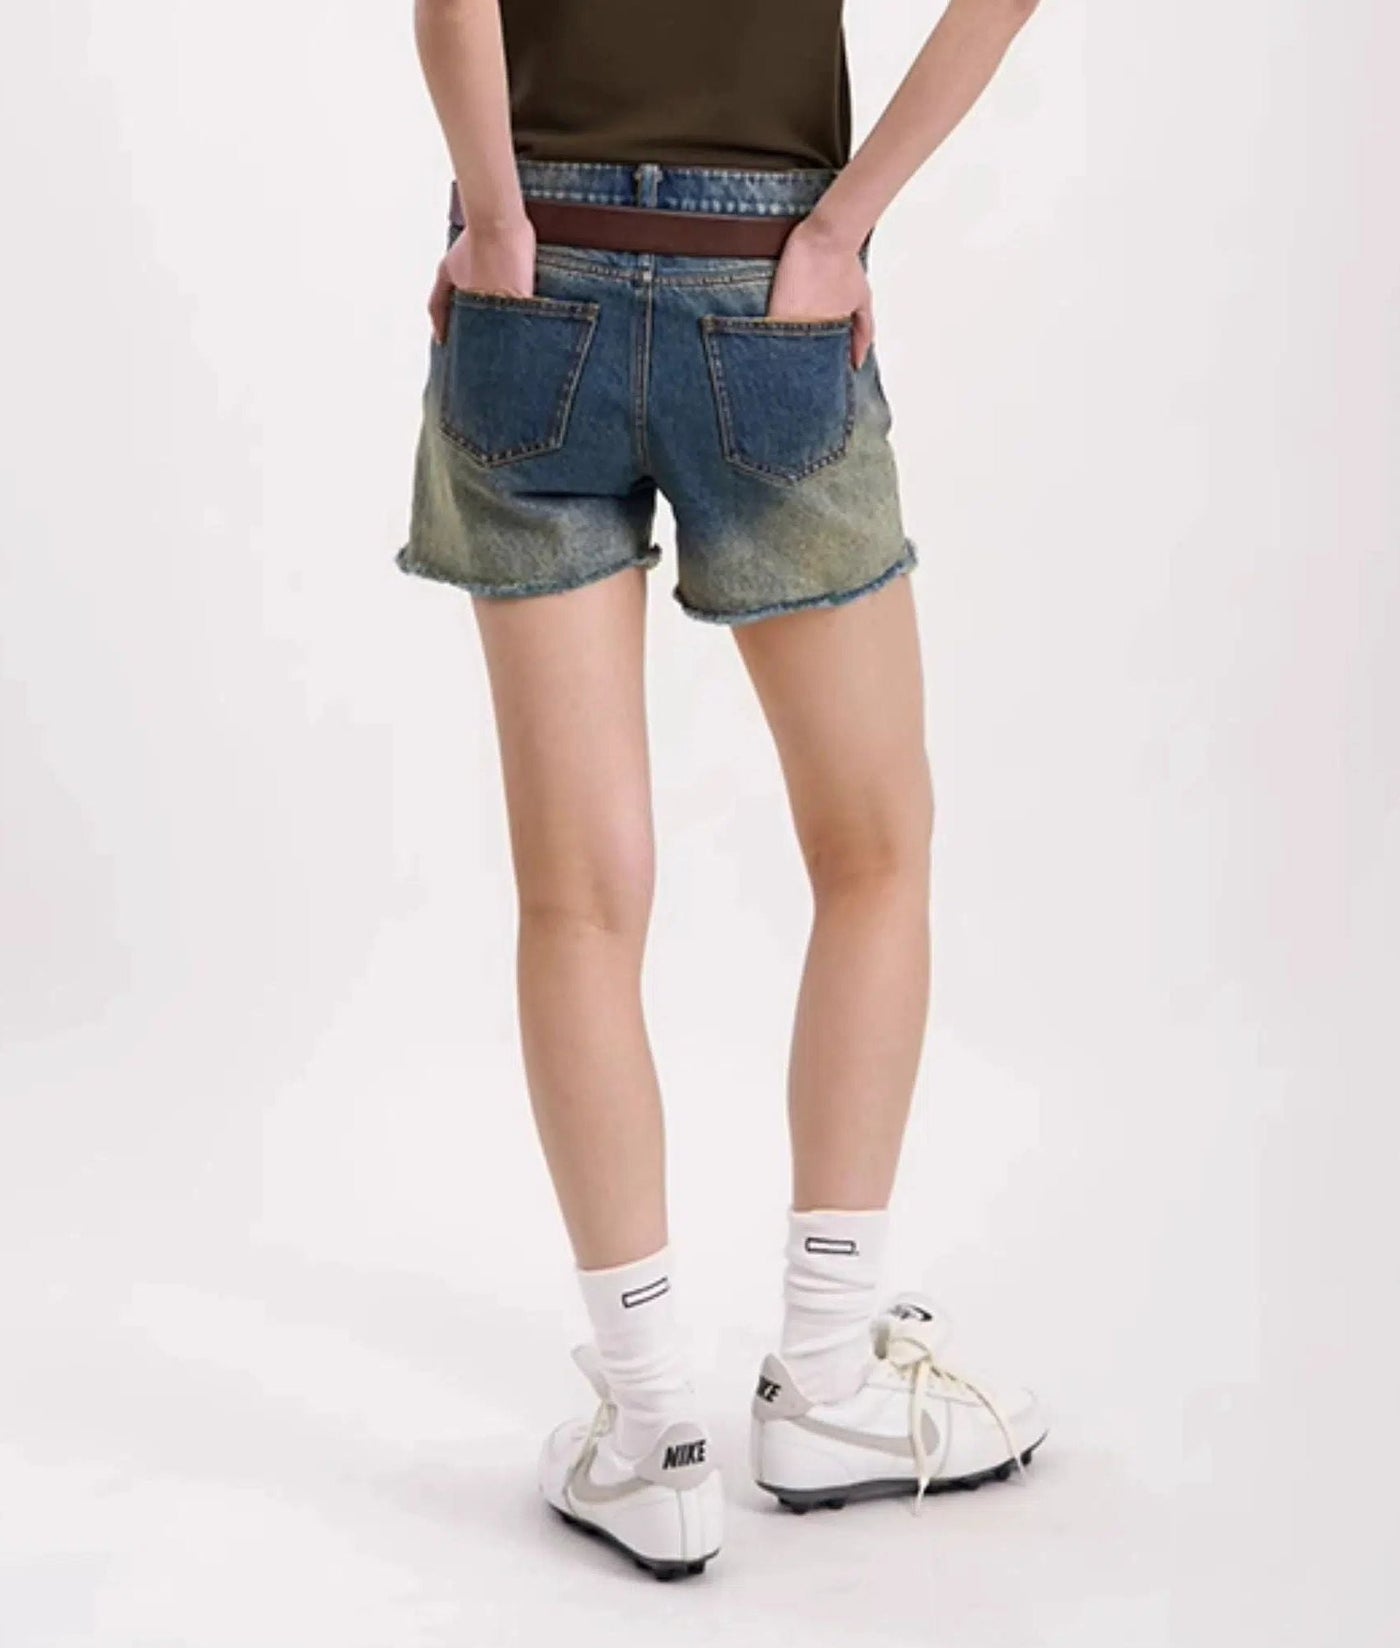 Washed Raw Edge Denim Shorts Korean Street Fashion Shorts By Opicloth Shop Online at OH Vault